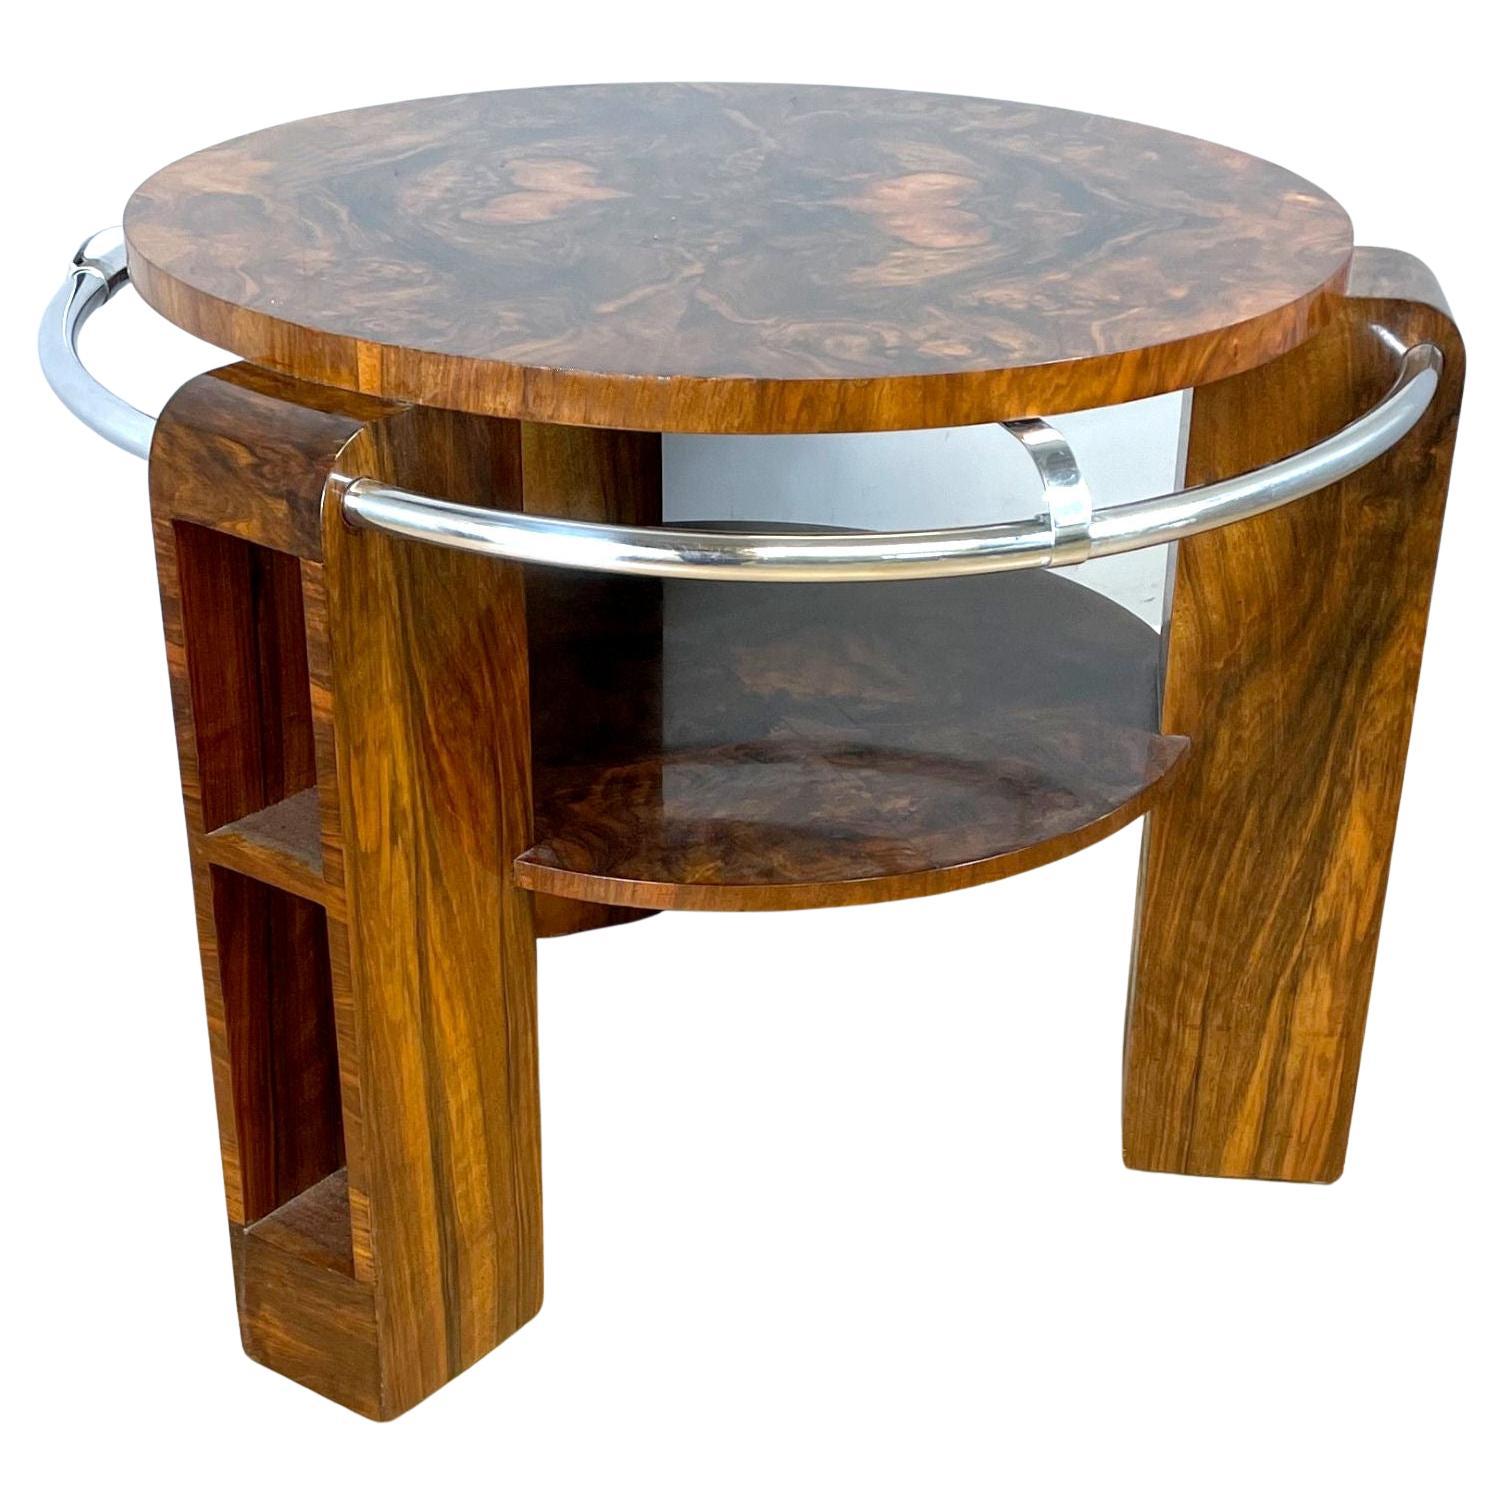 For your consideration is this rare opportunity to acquire a highly stylised Art Deco circular occasional table dating to the 1930's and believed to be English in origin. A chrome outer rail encircles the table and is in unusually good condition